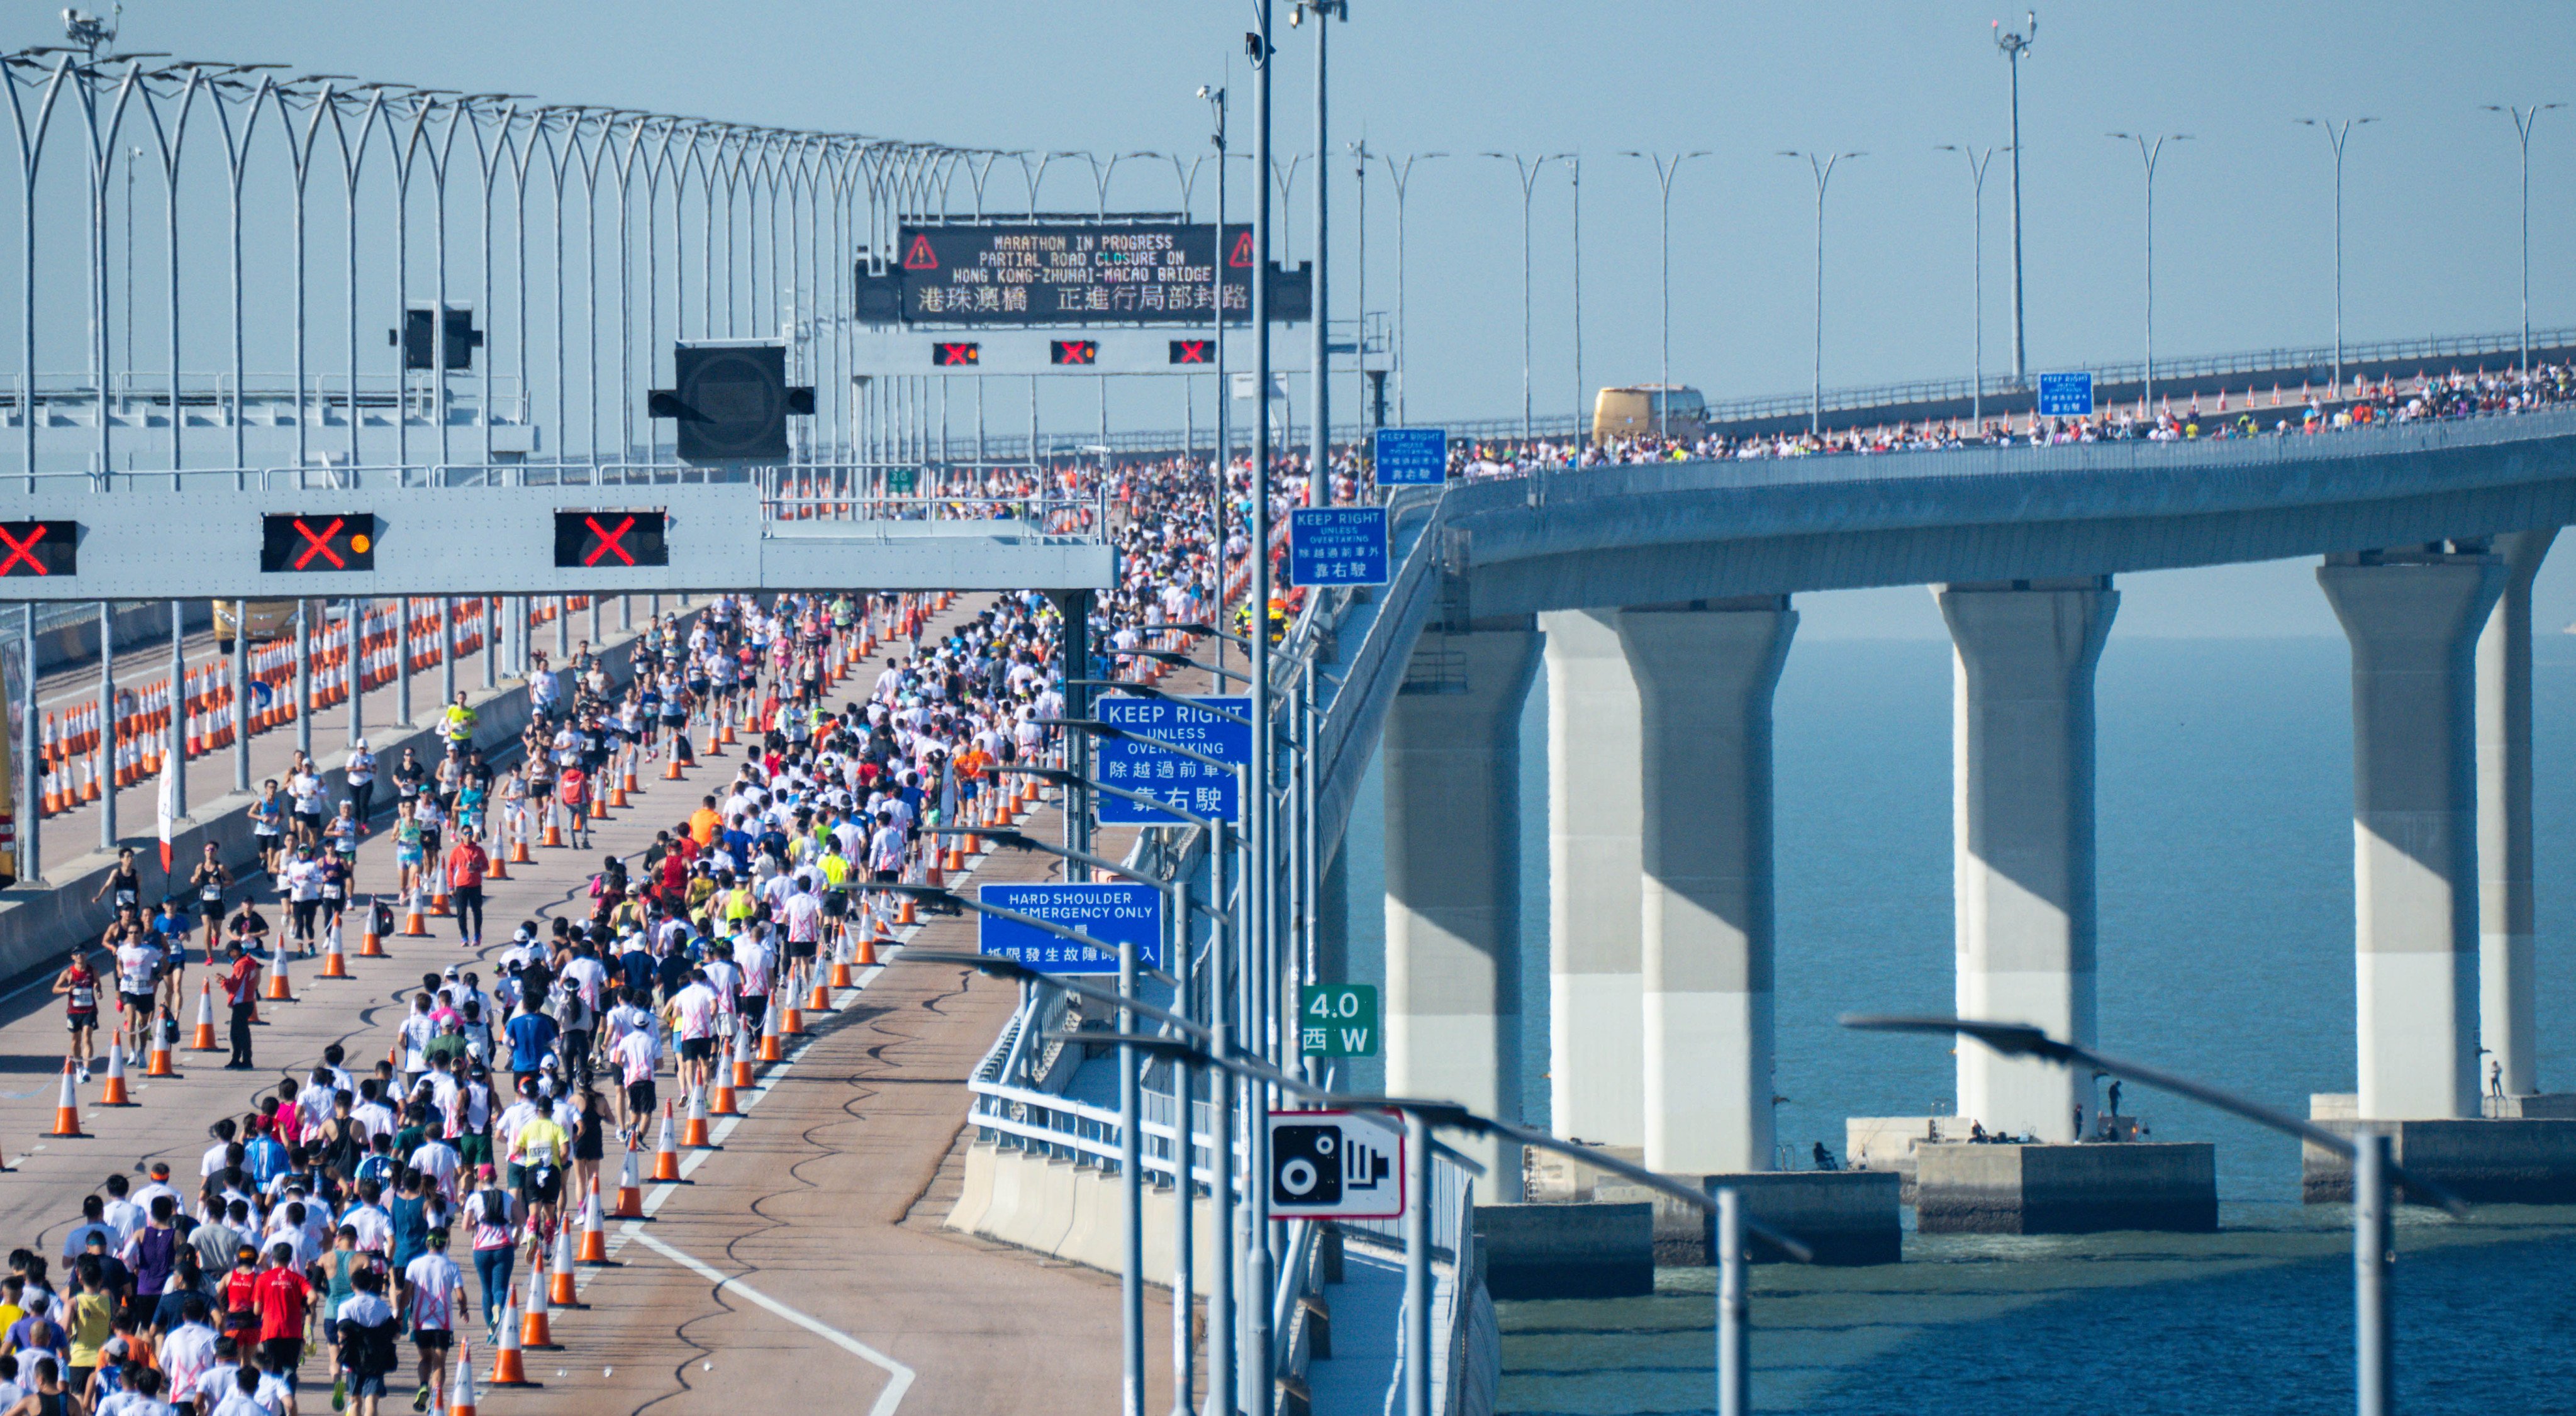 The section of bridge used for Sunday’s half marathon posed challenges for organisers.
Photo: Handout